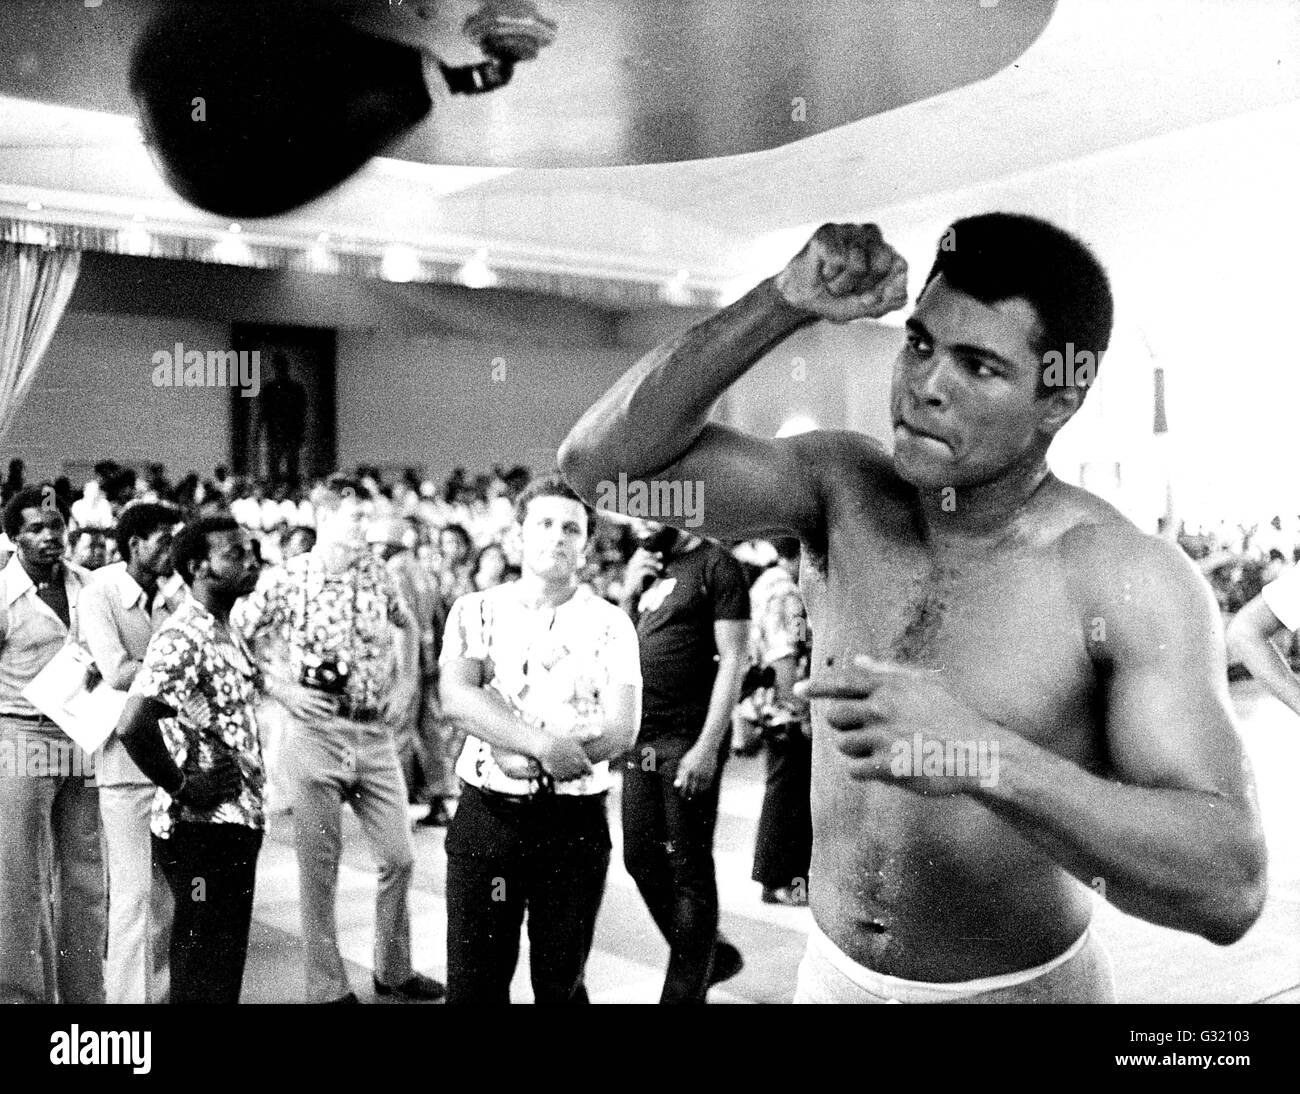 File. 3rd June, 2016. MUHAMMAD ALI, the three time heavyweight boxing champion, has died at the age of 74. He had been fighting a respiratory illness. 'The Greatest' was the dominant heavyweight boxer of the 1960s and 1970s, Ali won an Olympic gold medal in Rome in 1960, captured the professional world heavyweight championship on three separate occasions, and successfully defended his title 19 times. PICTURED: Oct. 30, 1974 - Dec. 17, 2004 -MUHAMMAD ALI training for the Ali-Foreman match in Zaire. © Globe Photos/ZUMAPRESS.com/Alamy Live News Stock Photo